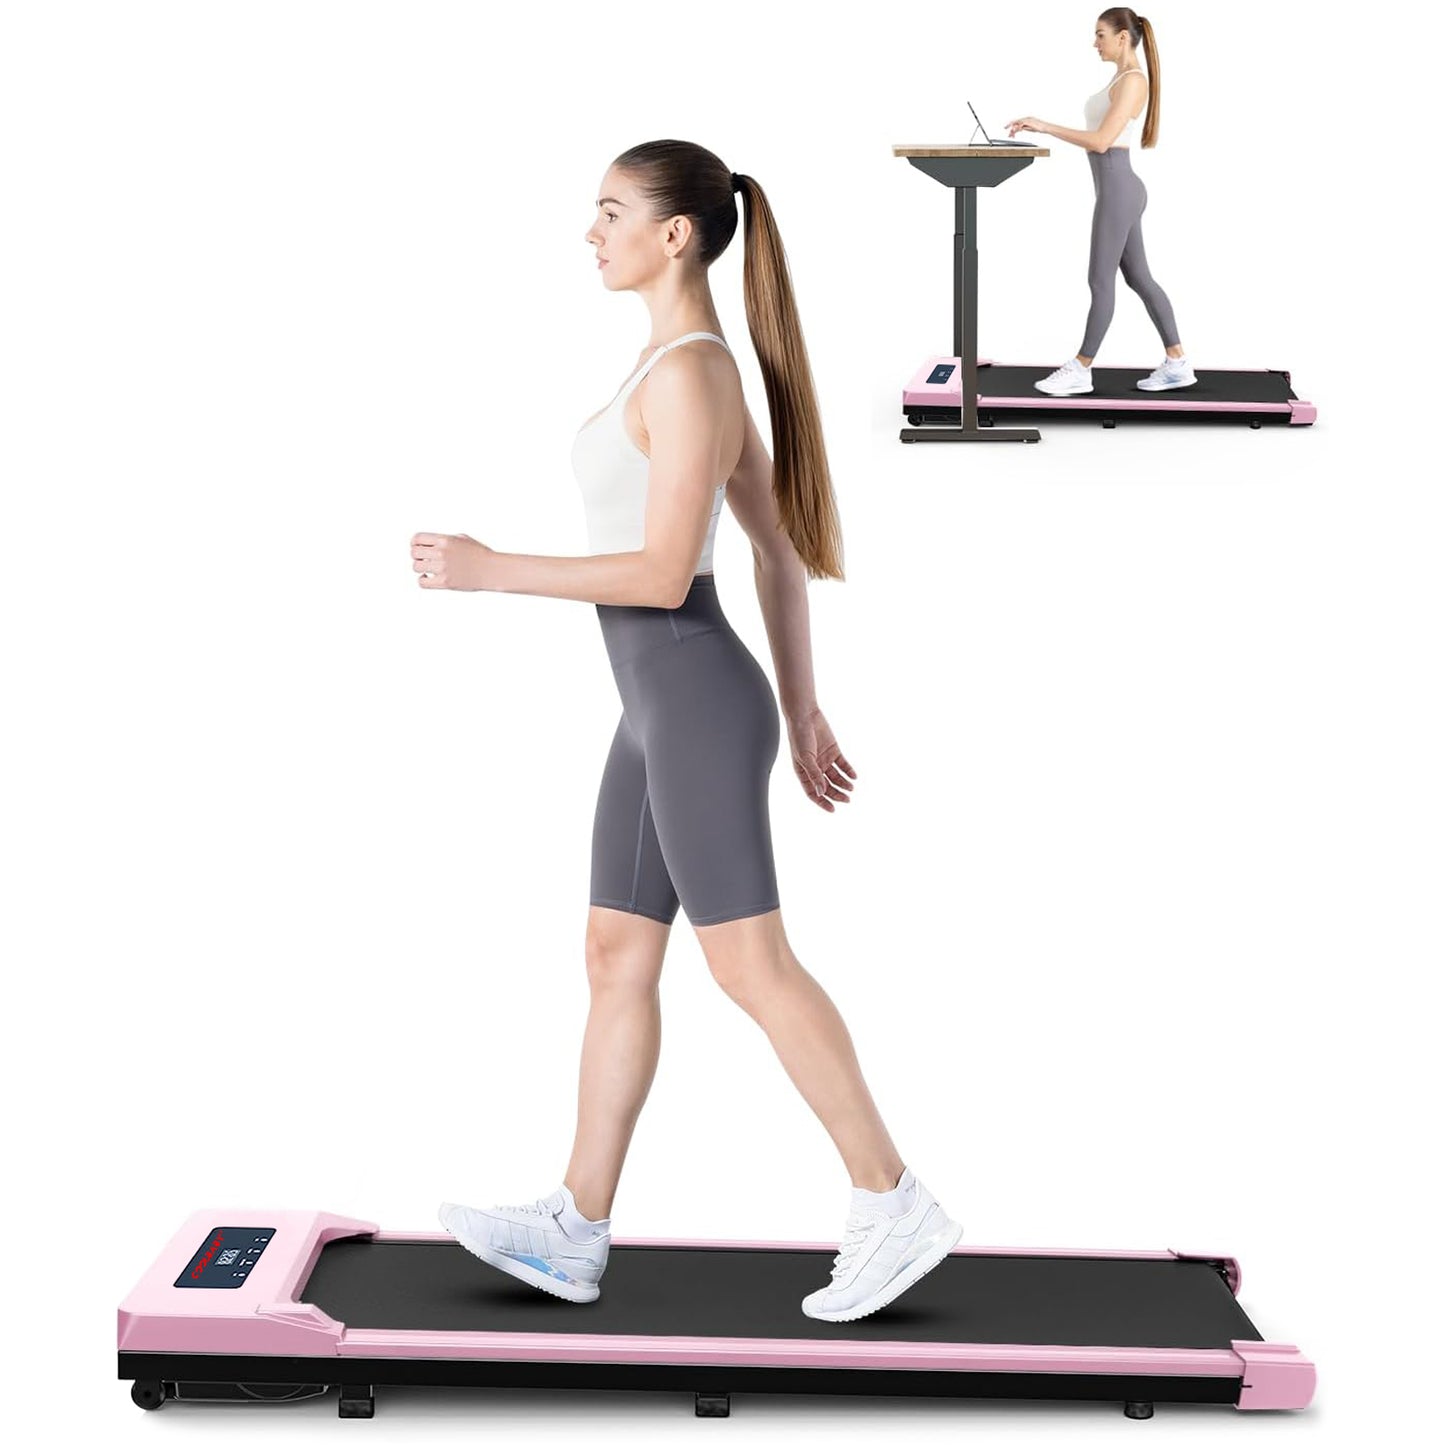 COOLBABY PBJB01 Compact and Powerful Under Desk Treadmill | Wireless Remote Control | LED Display | Ideal for Home and Office Use